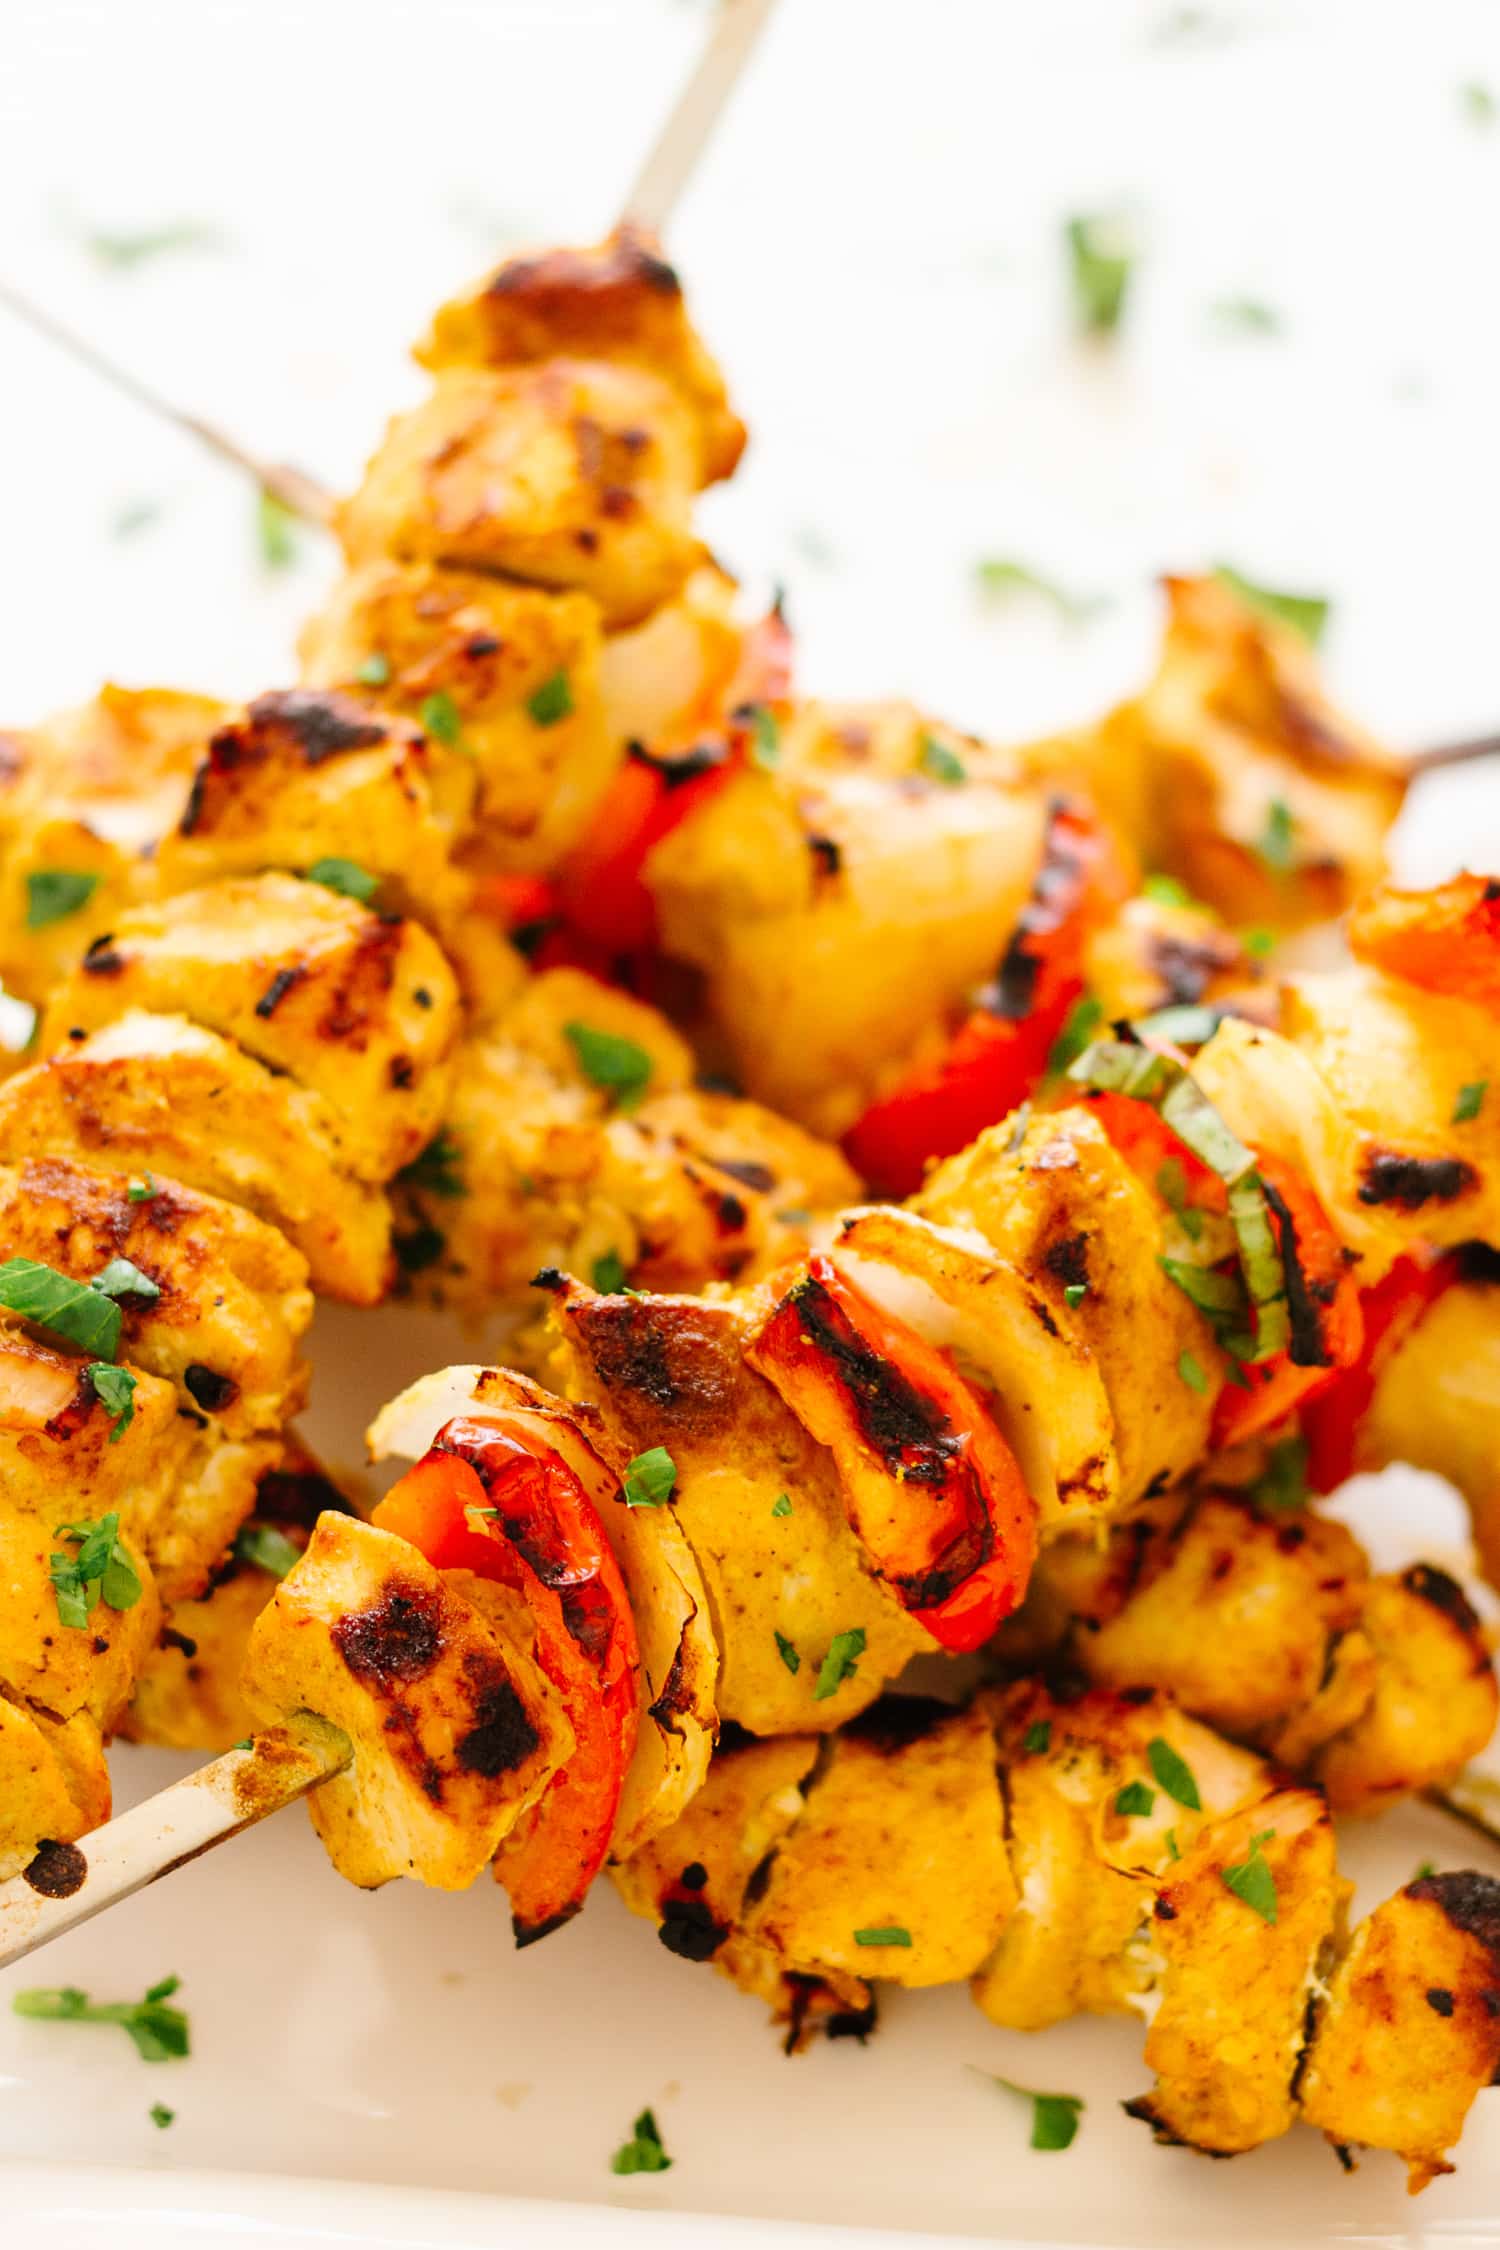 Pile of Grilled Tandoori Chicken Kebabs on a white plate